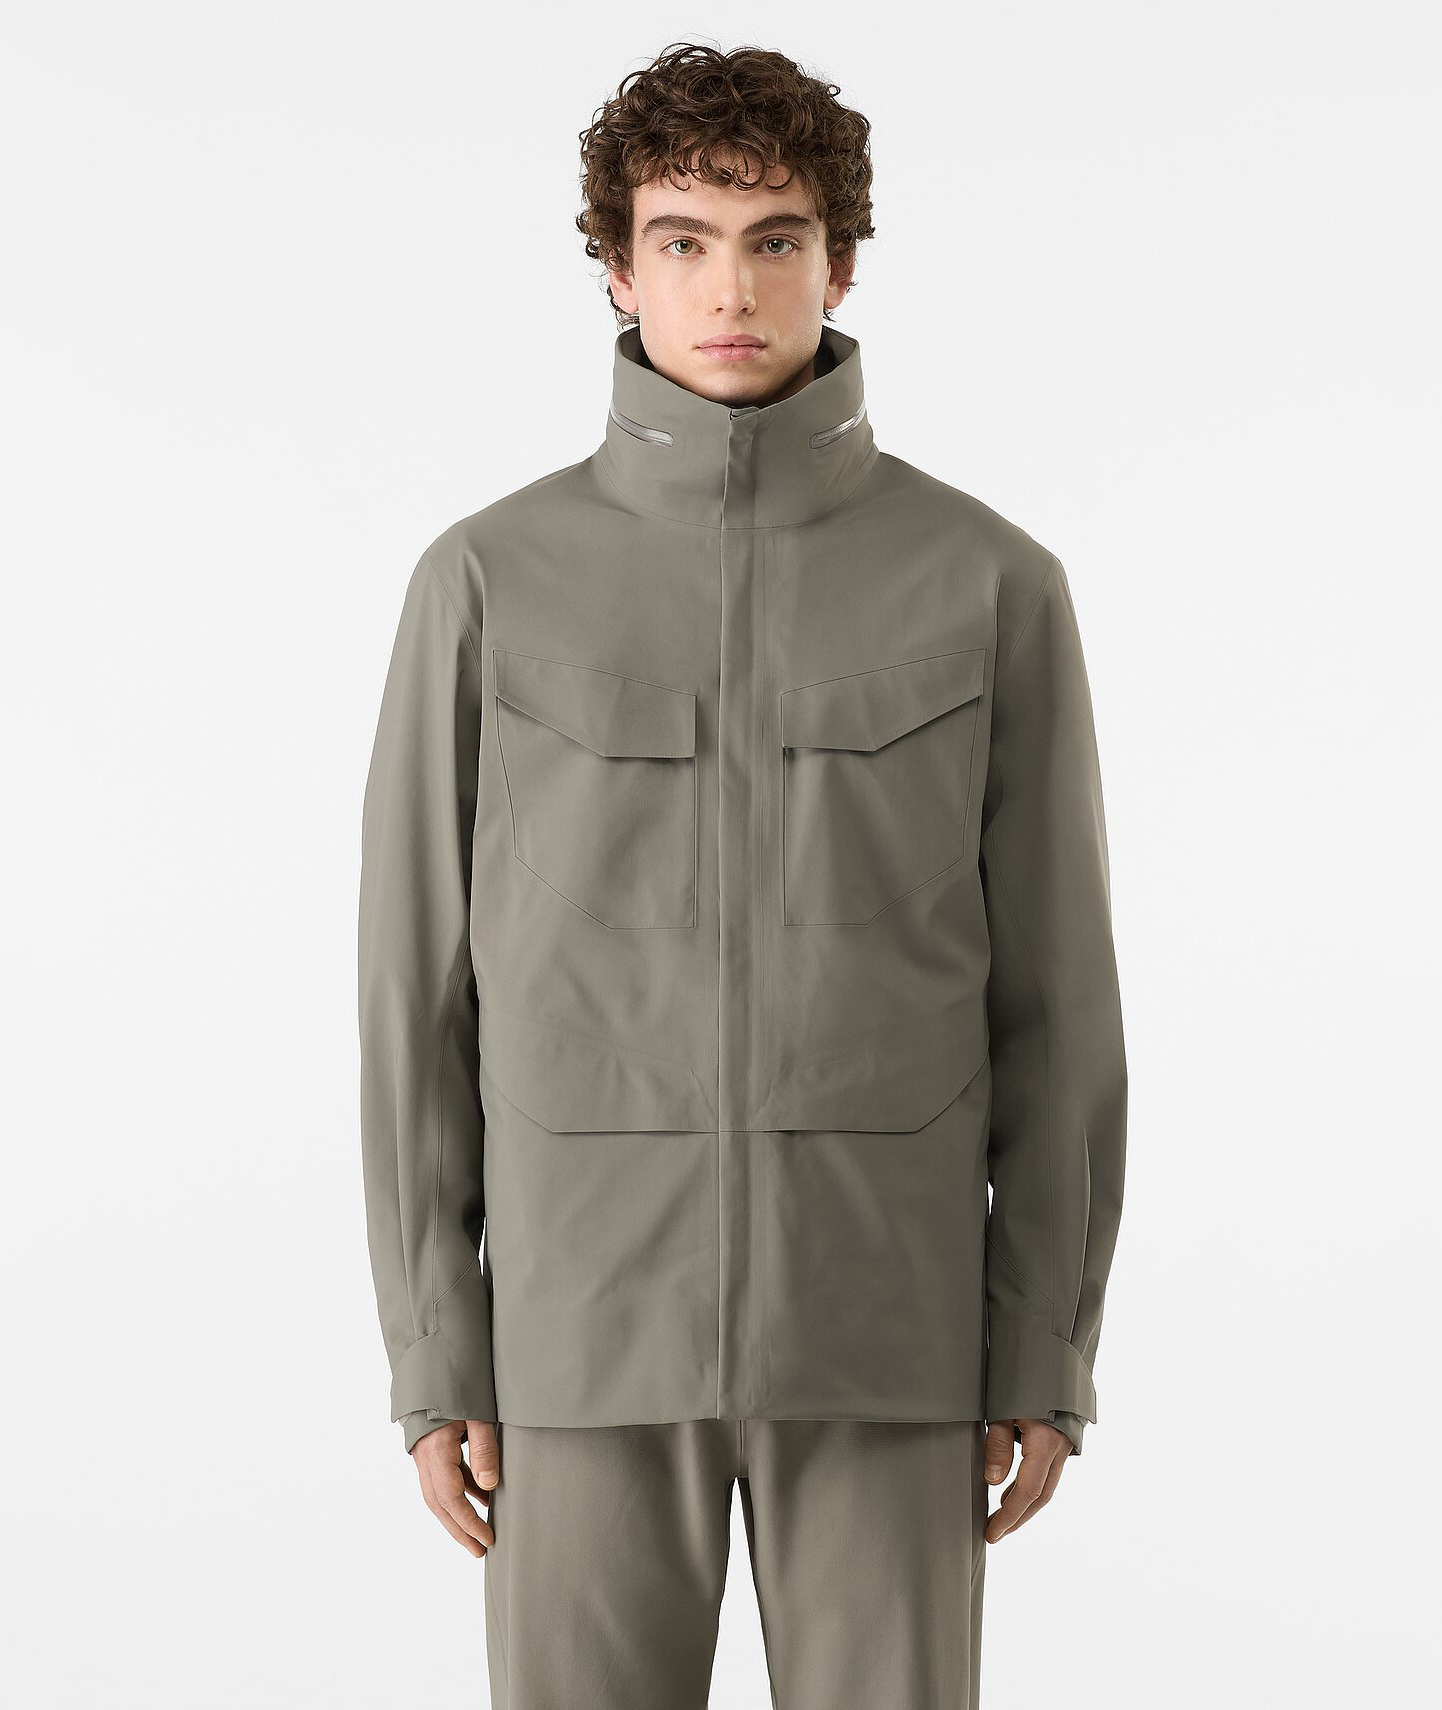 Norse Store | Shipping Worldwide - Veilance Field Jacket - Forage